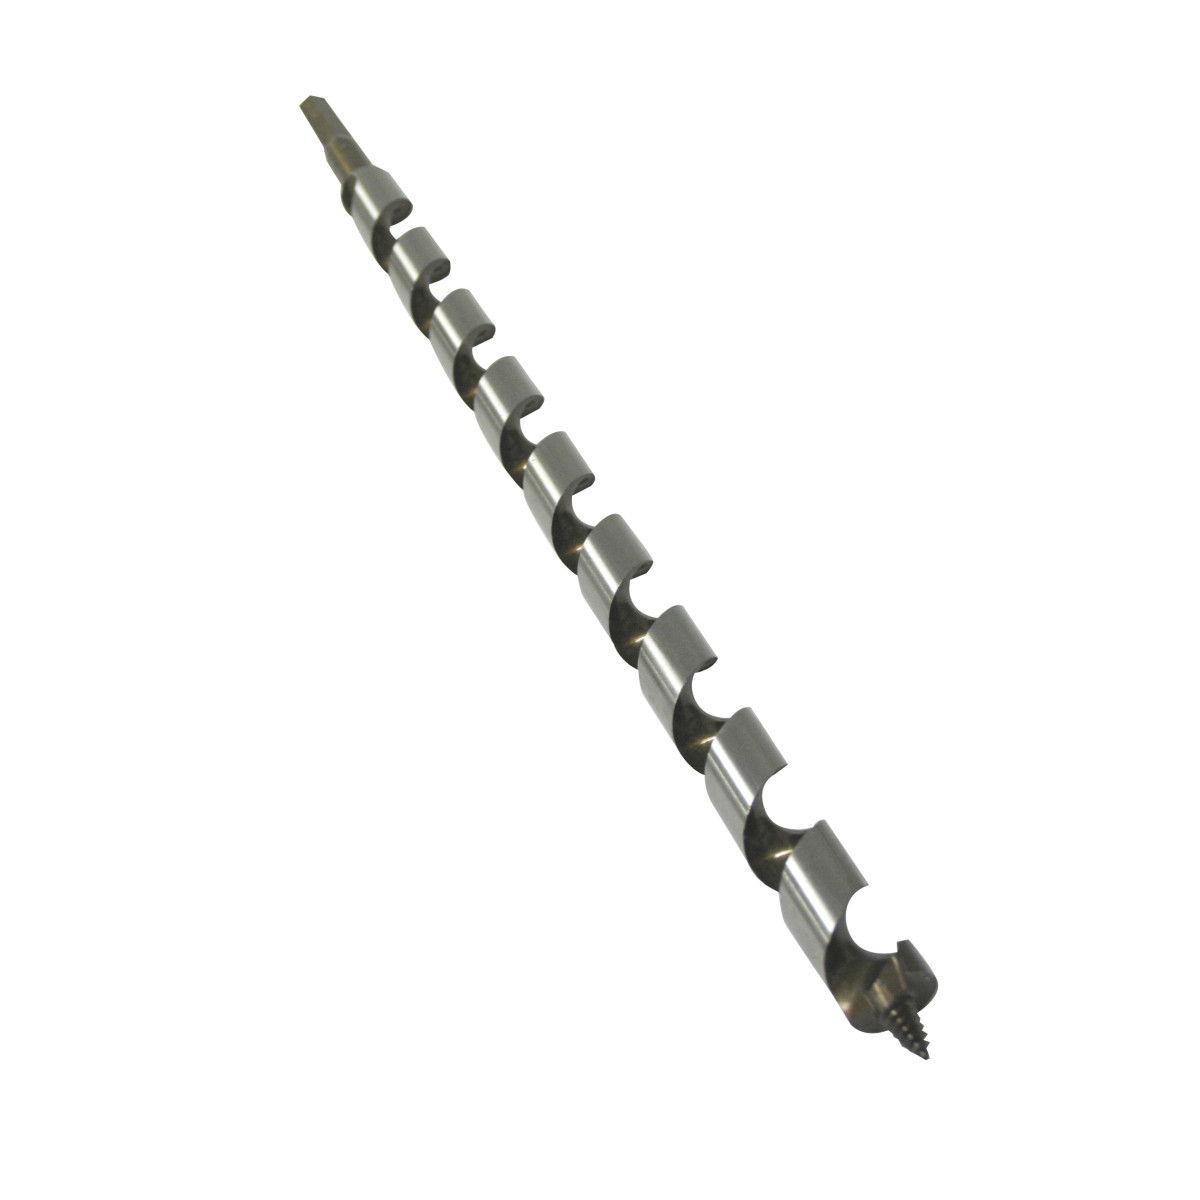 66PT78 - Nail Eater Extreme 7/8" (22.2 MM) Hole Diameter. - Greenlee